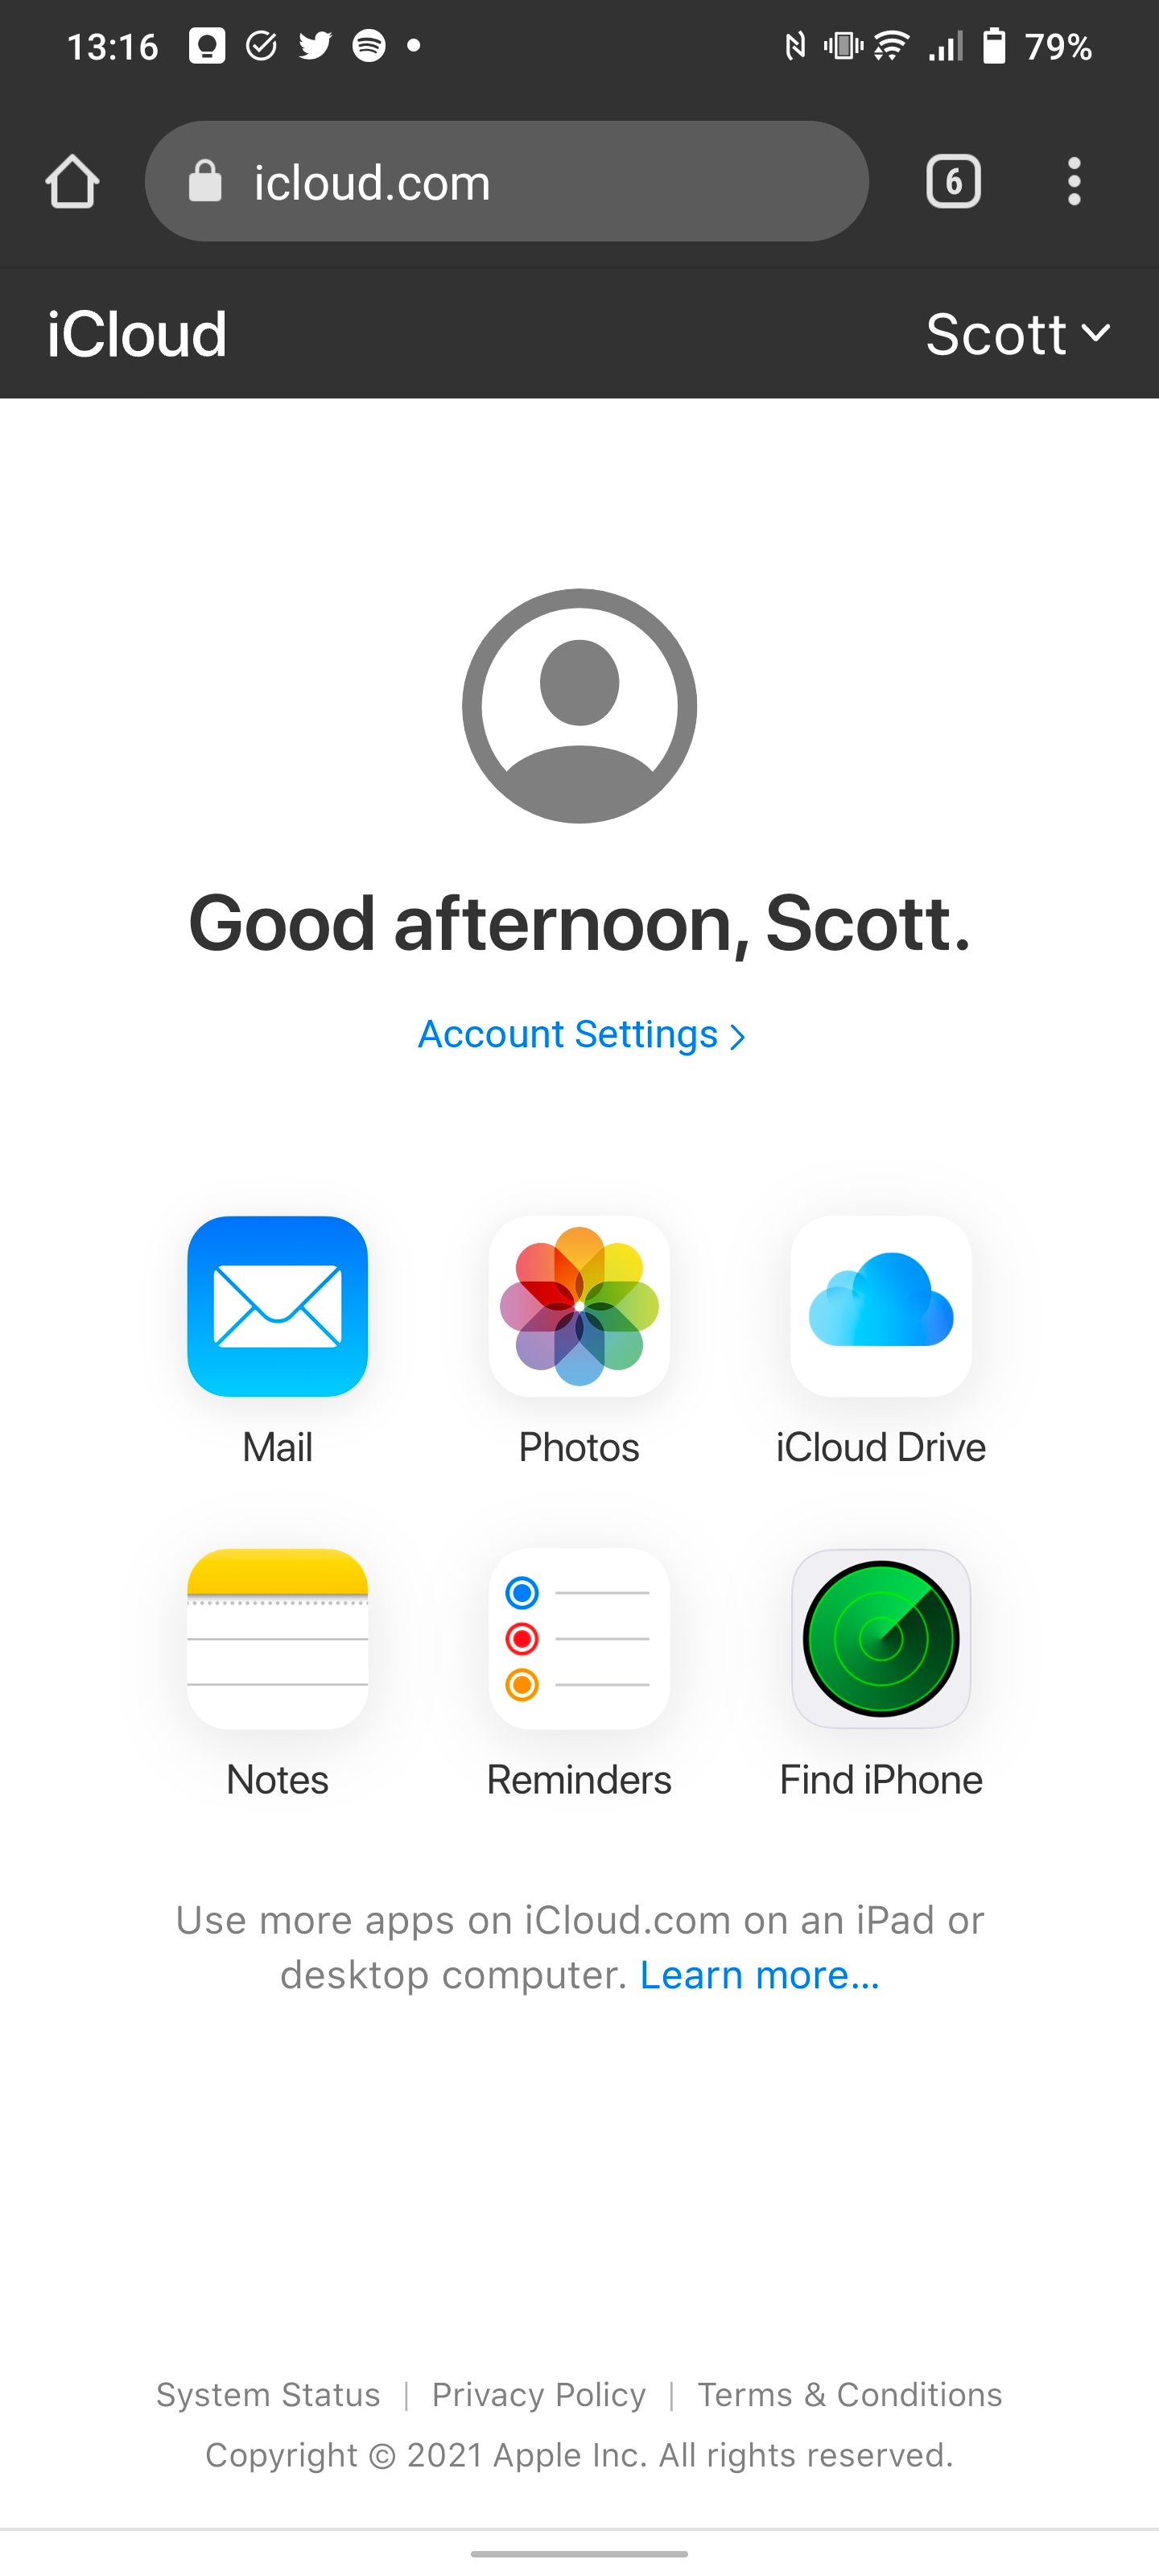 iCloud greeting on Android after signing in.